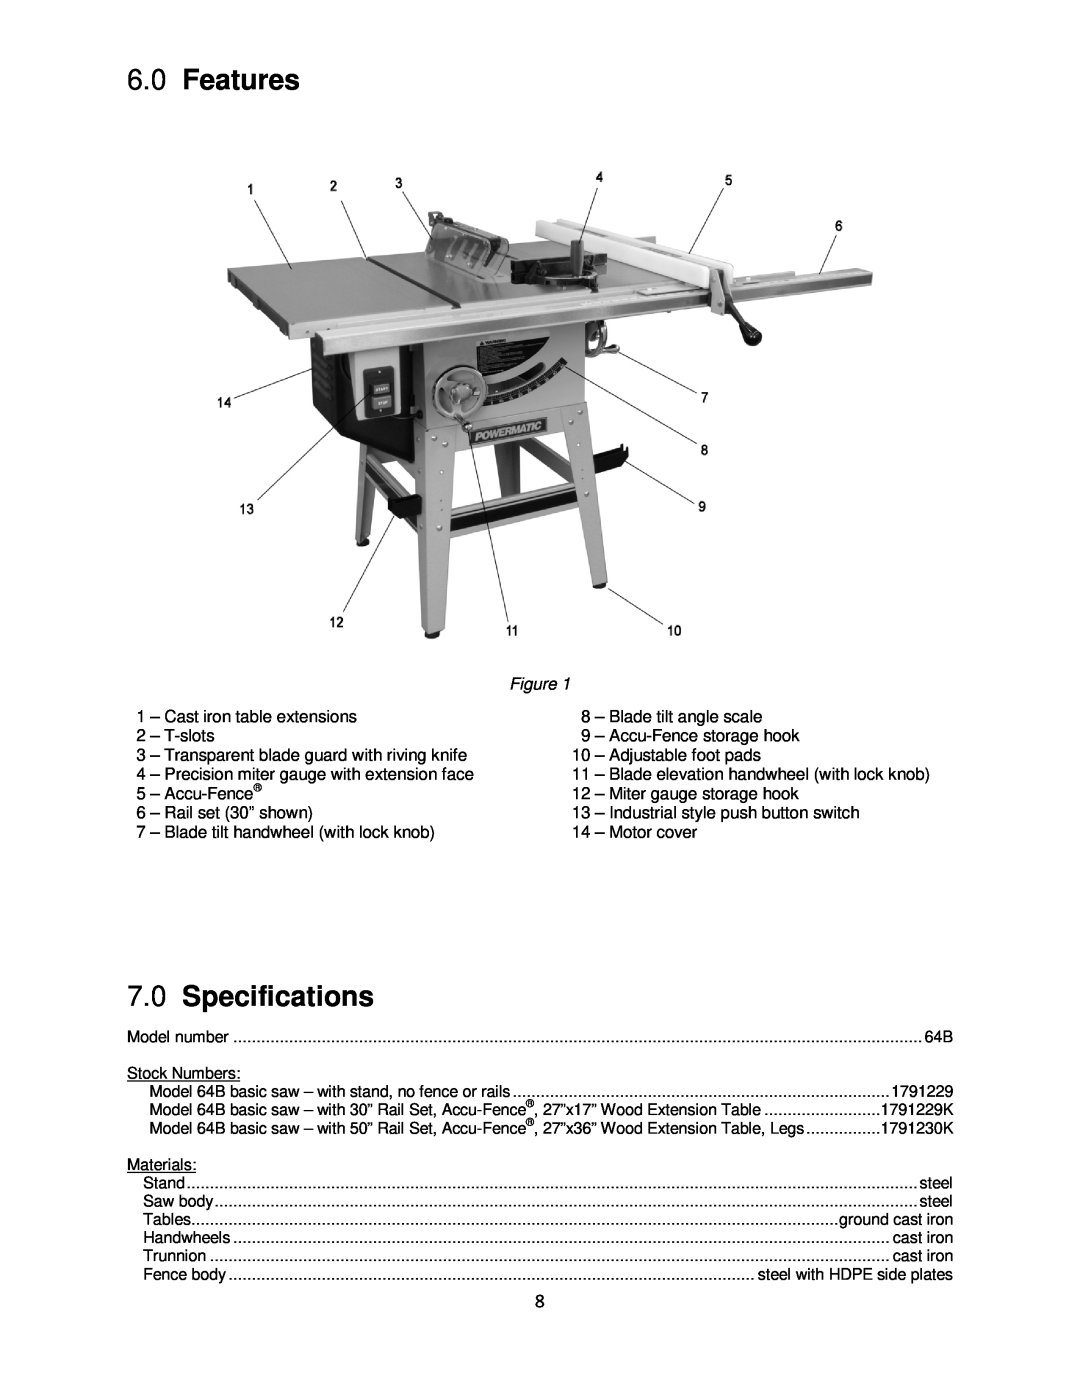 Powermatic 64B operating instructions Features, Specifications 